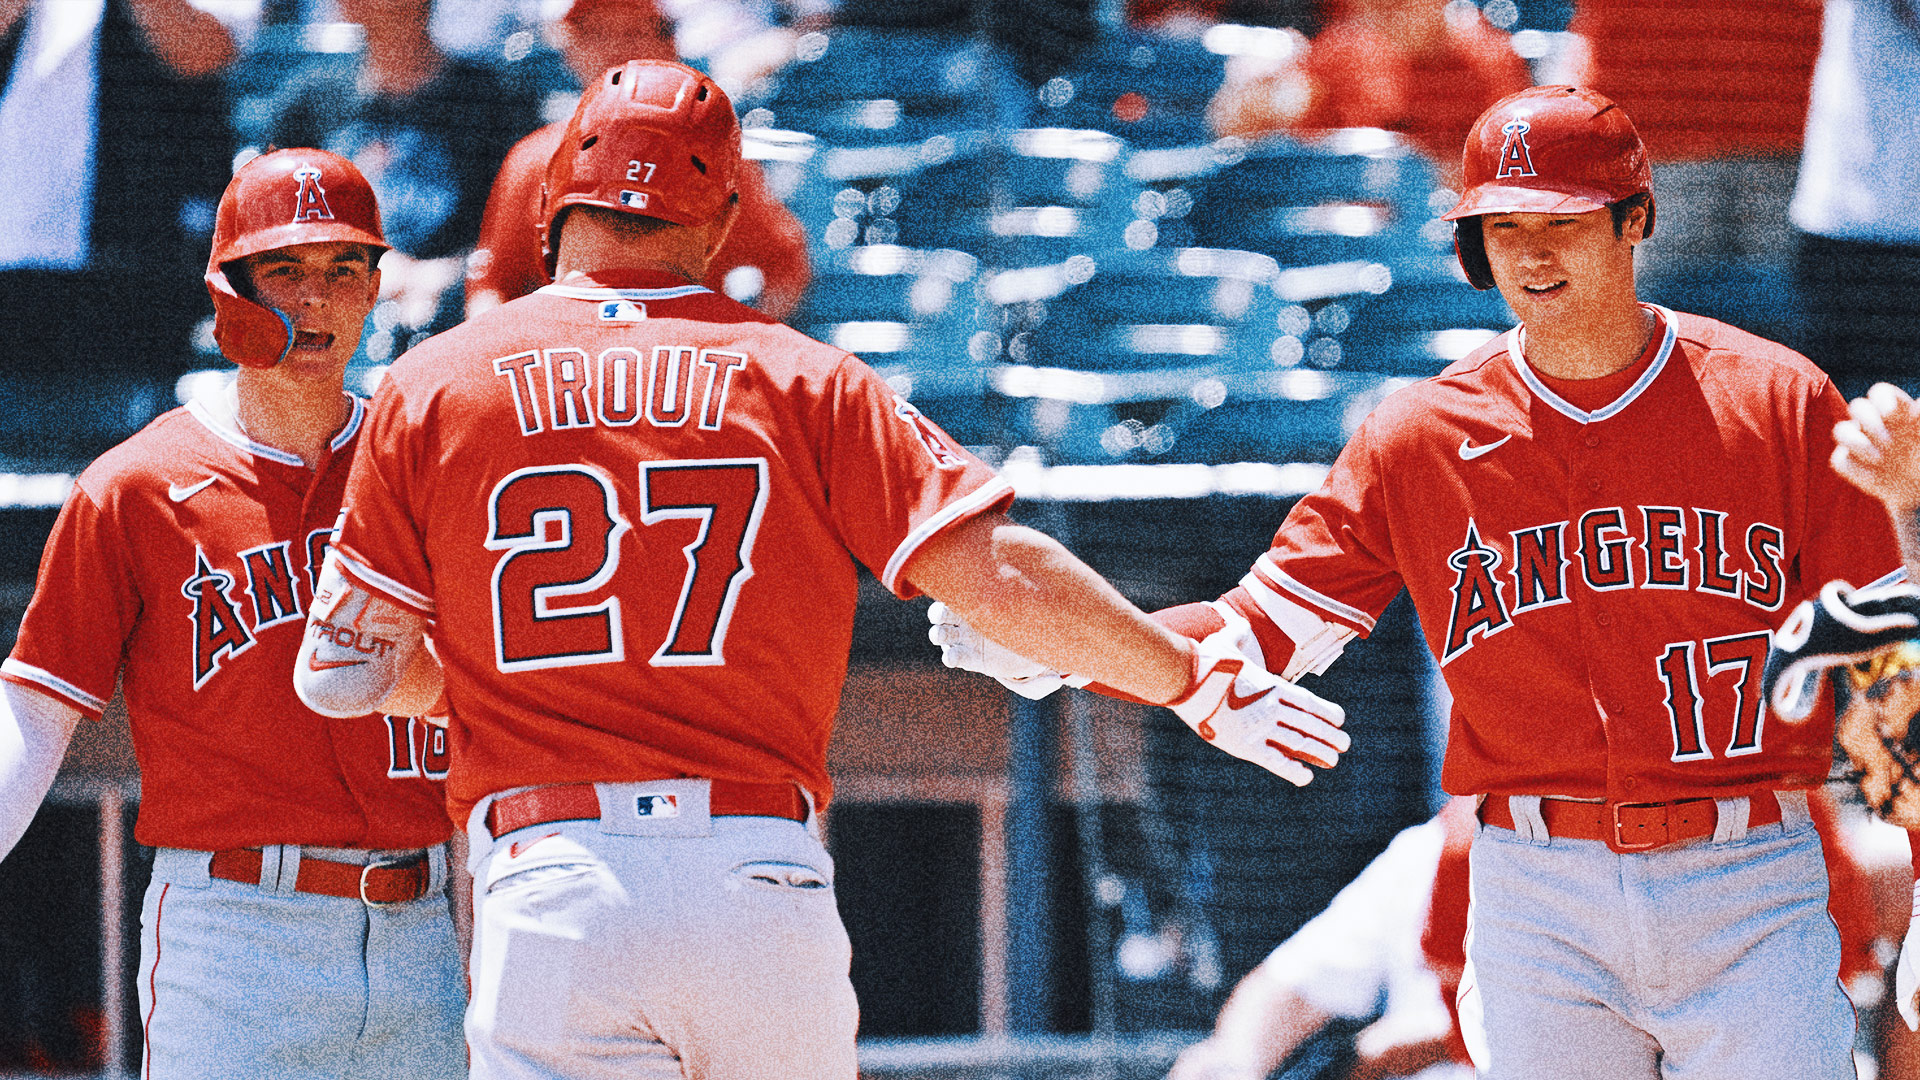 Shohei Ohtani, Mike Trout put on home run show in Angels' win over White Sox